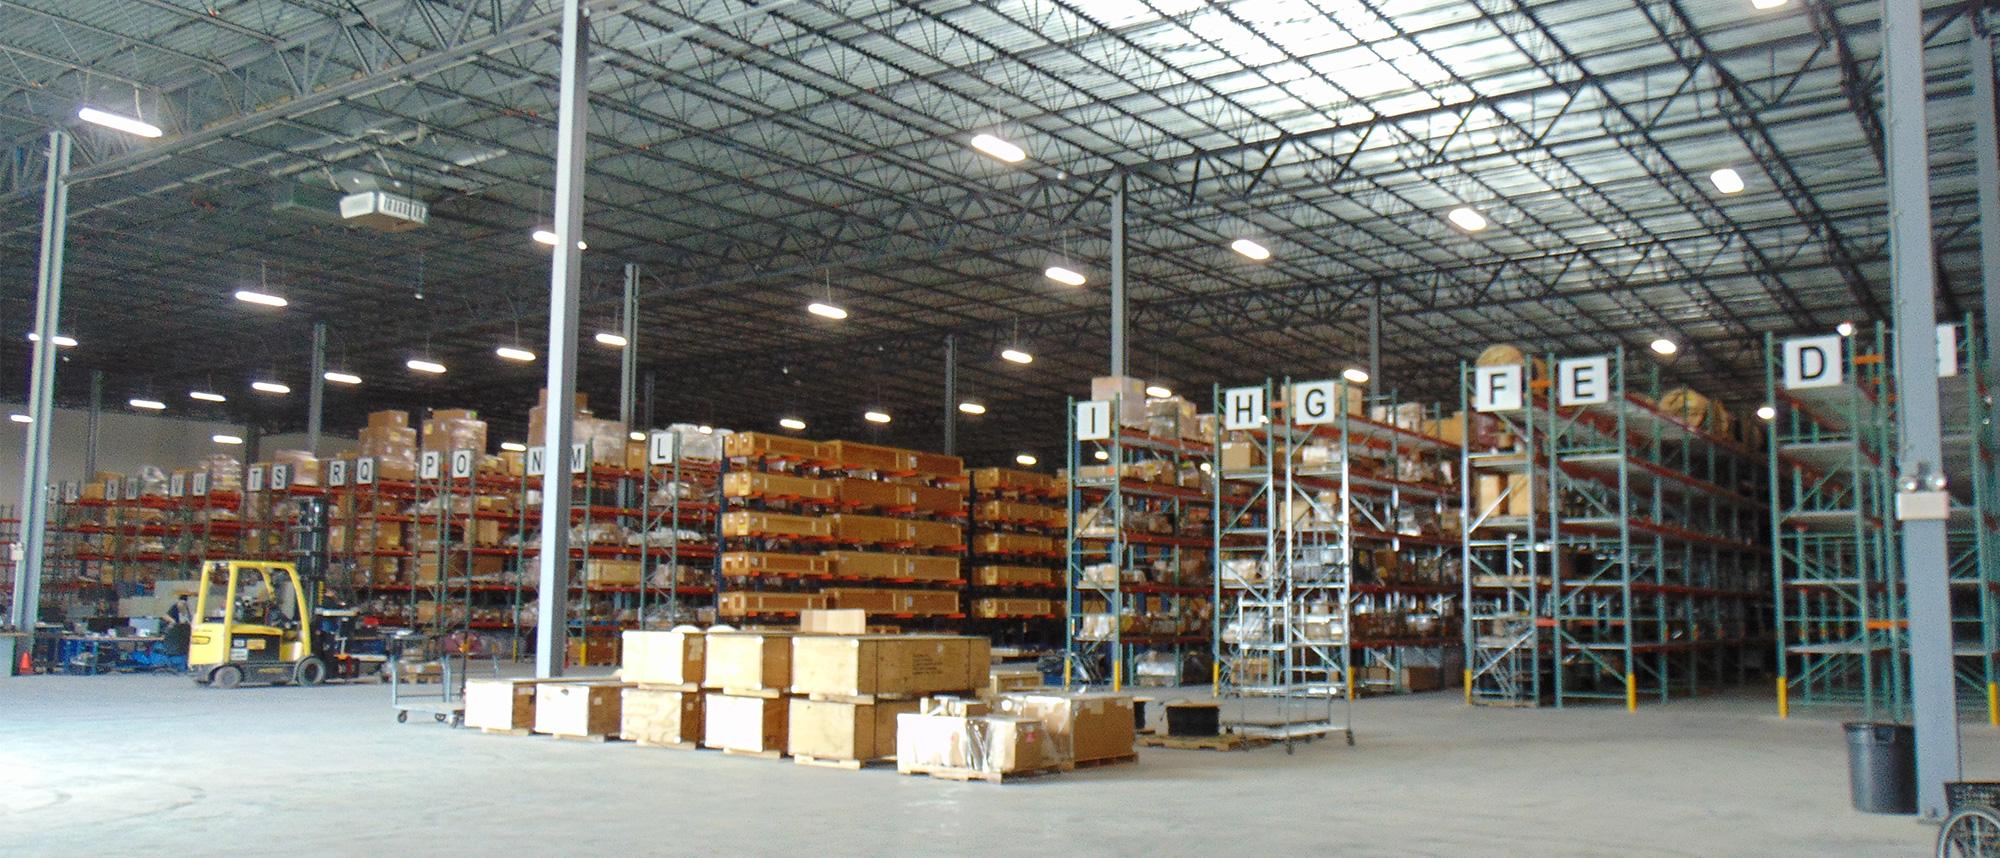 Warehouse facility with rows of boxes on shelves